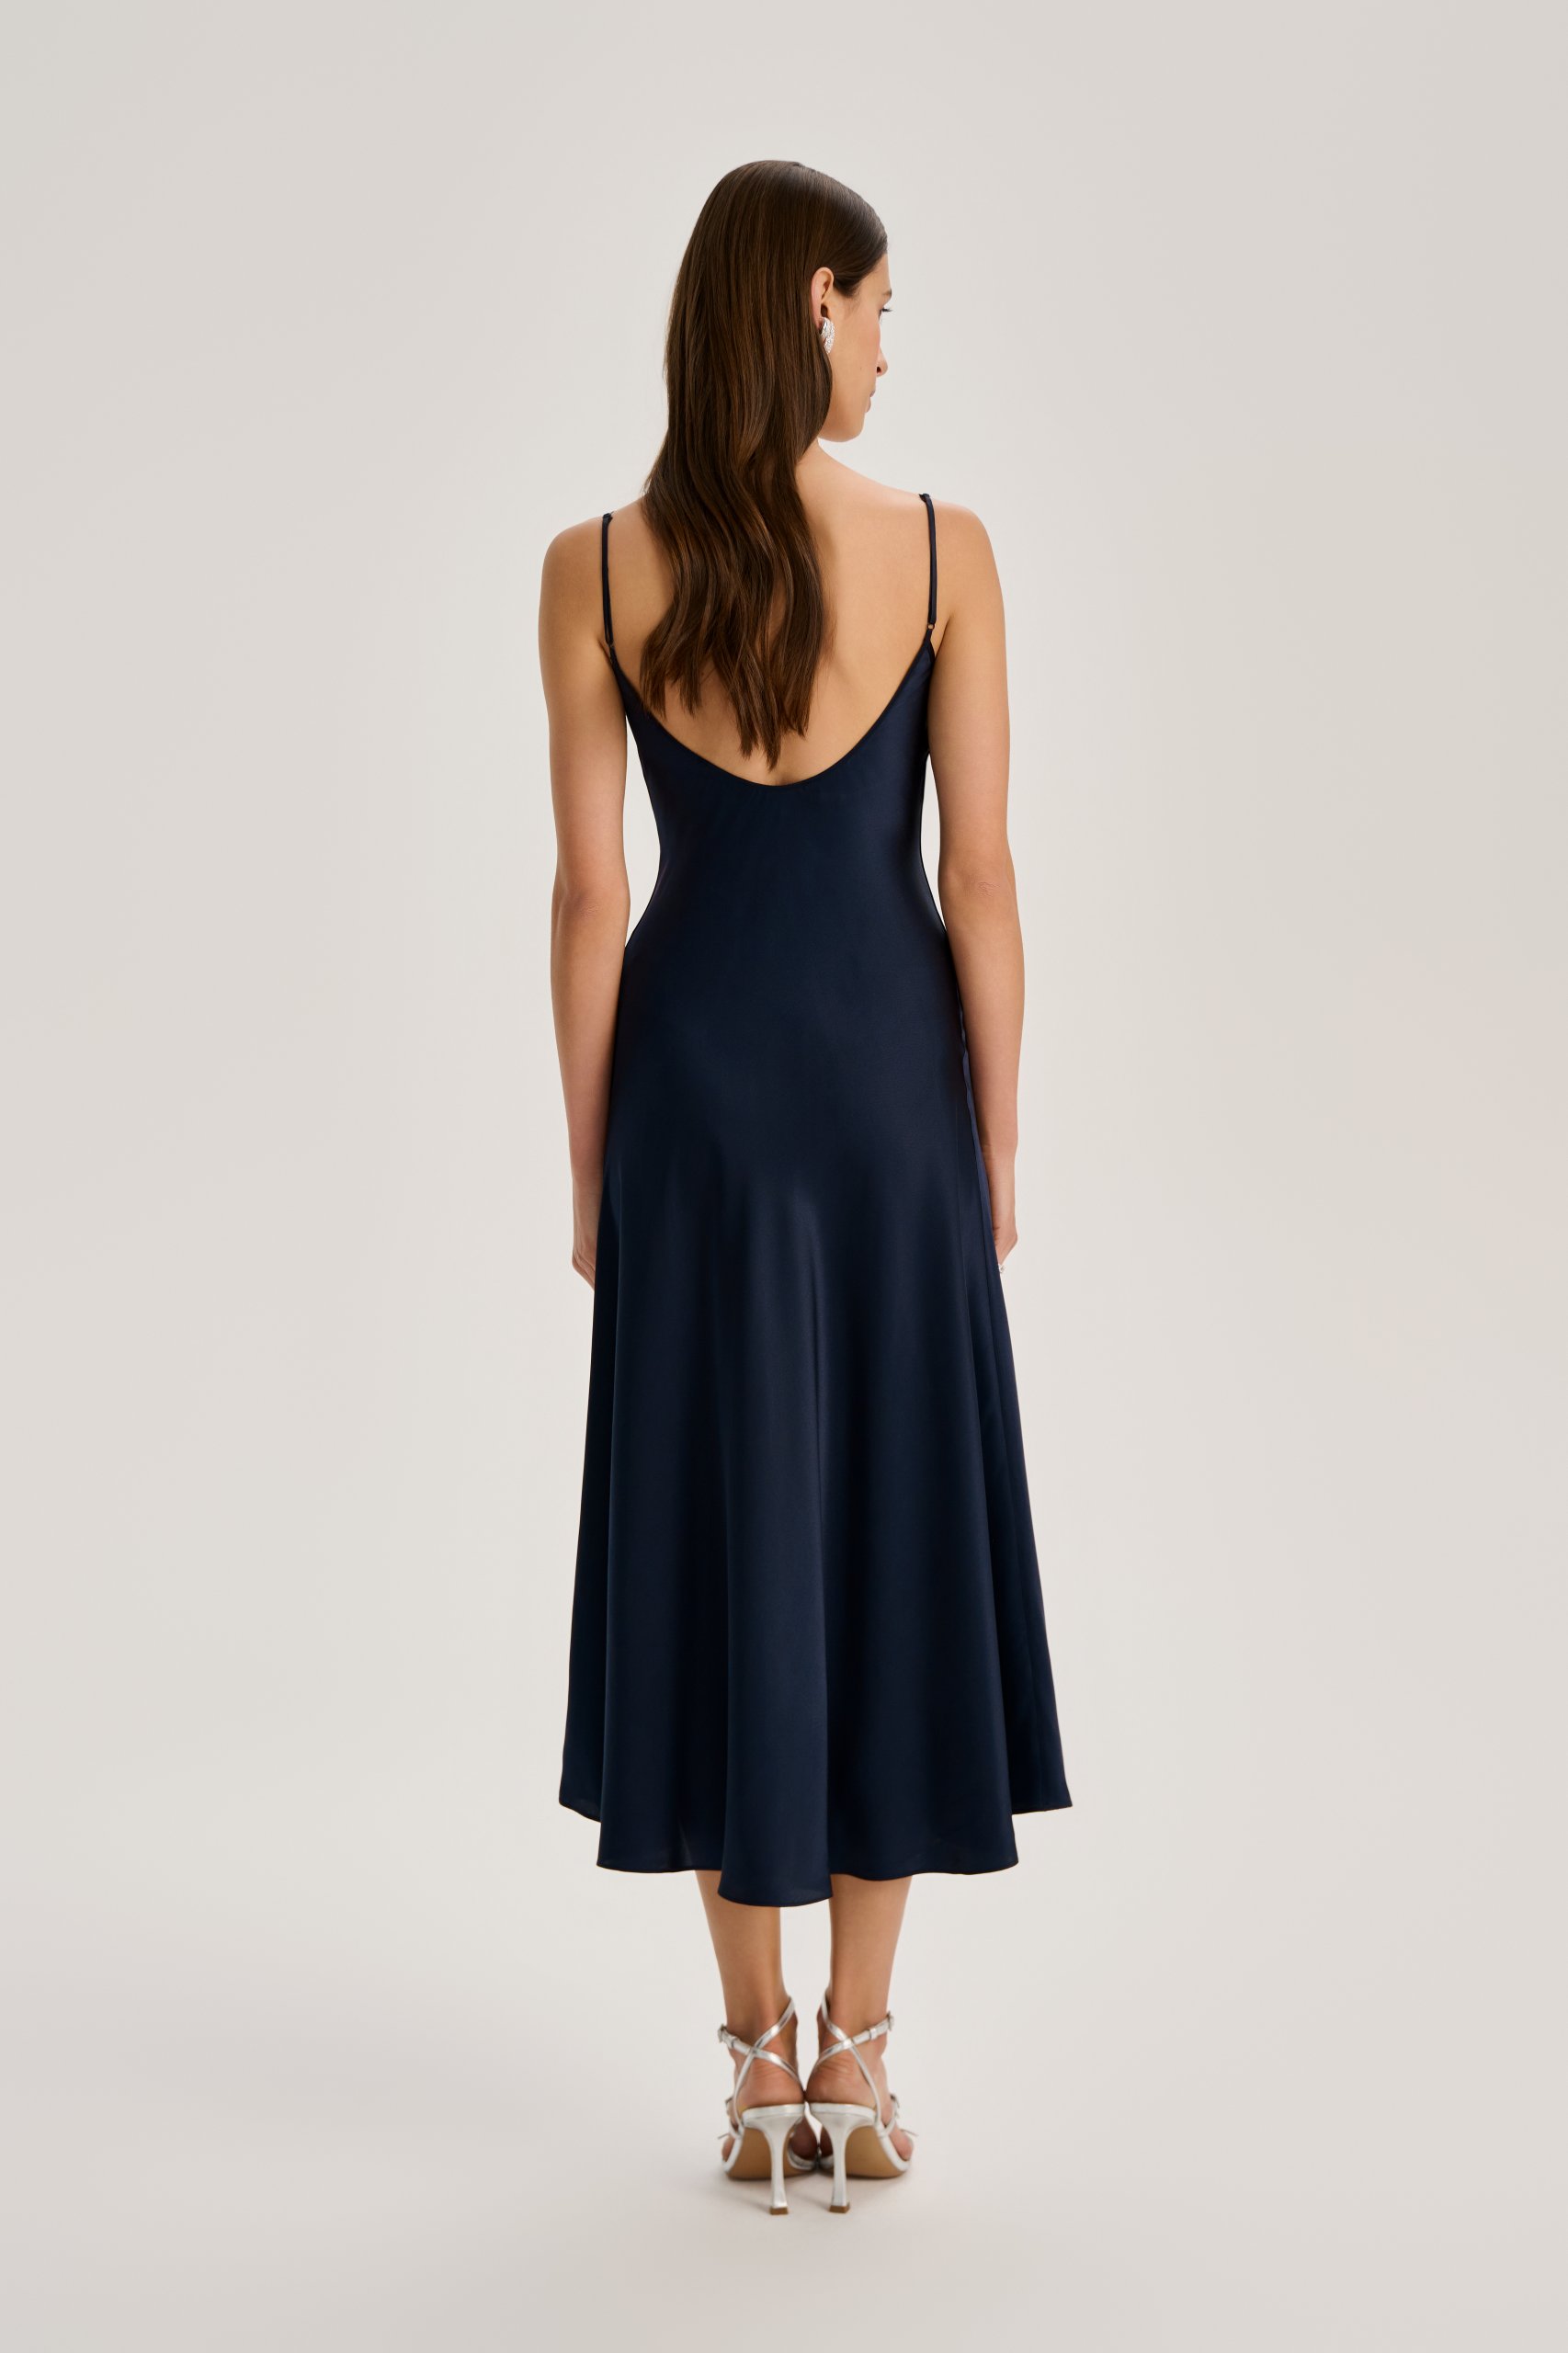 SILK MAXI DRESS FROM THE MOON COLLECTION